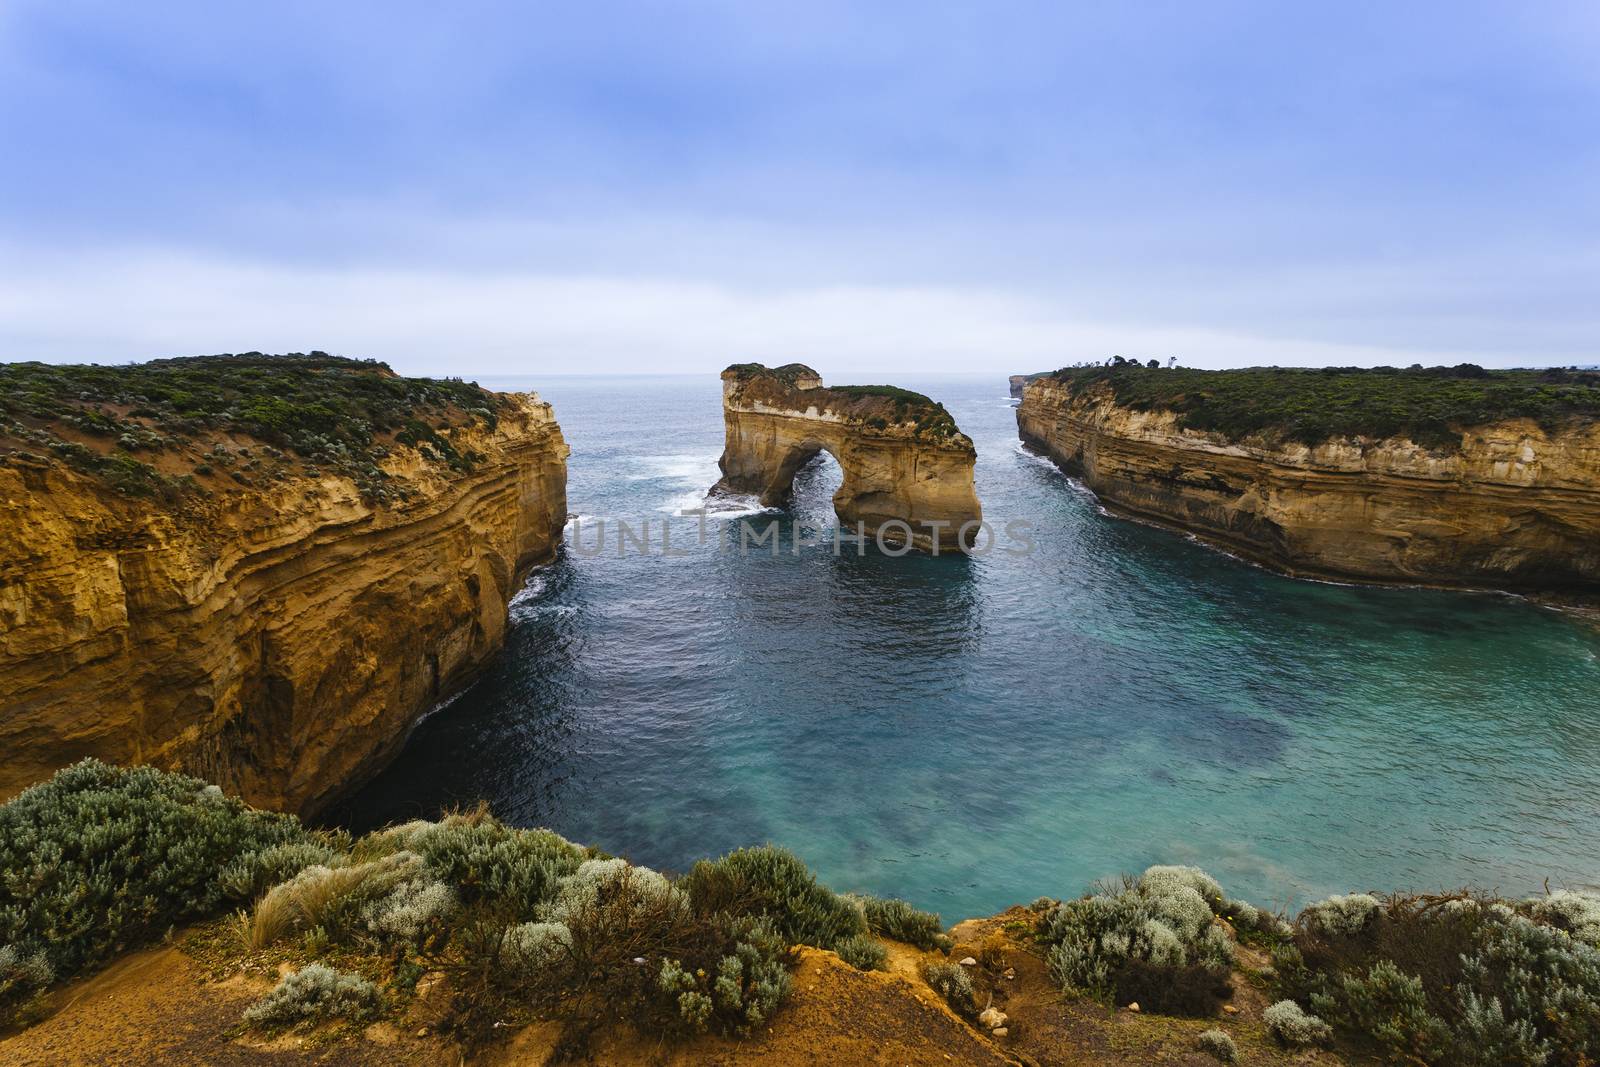 Photo from 2004 of the Island Archway on the Great Ocean Road in Australia.